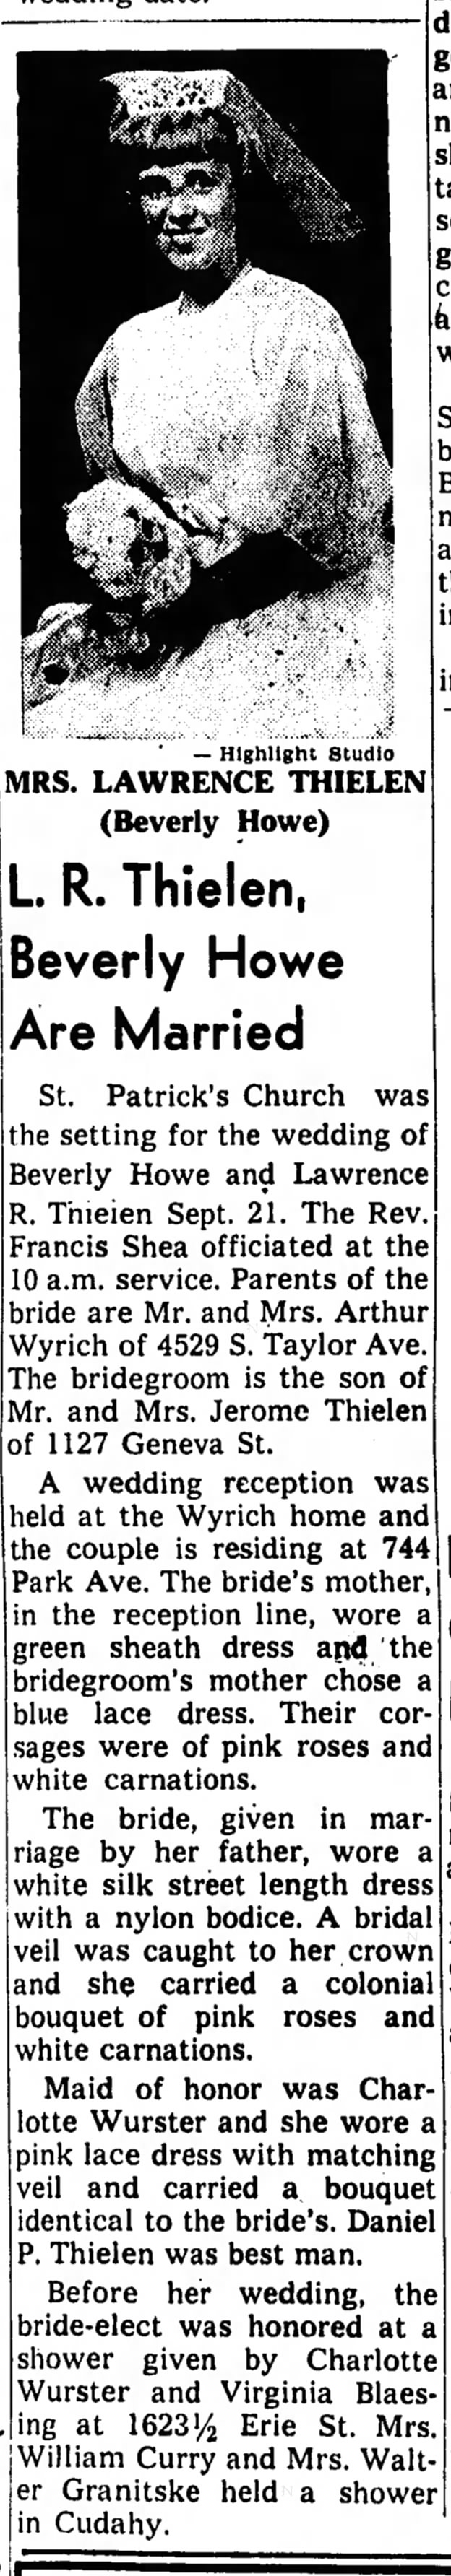 Larry Thielen (Brother) and Bev Howe - Marriage report September 1963